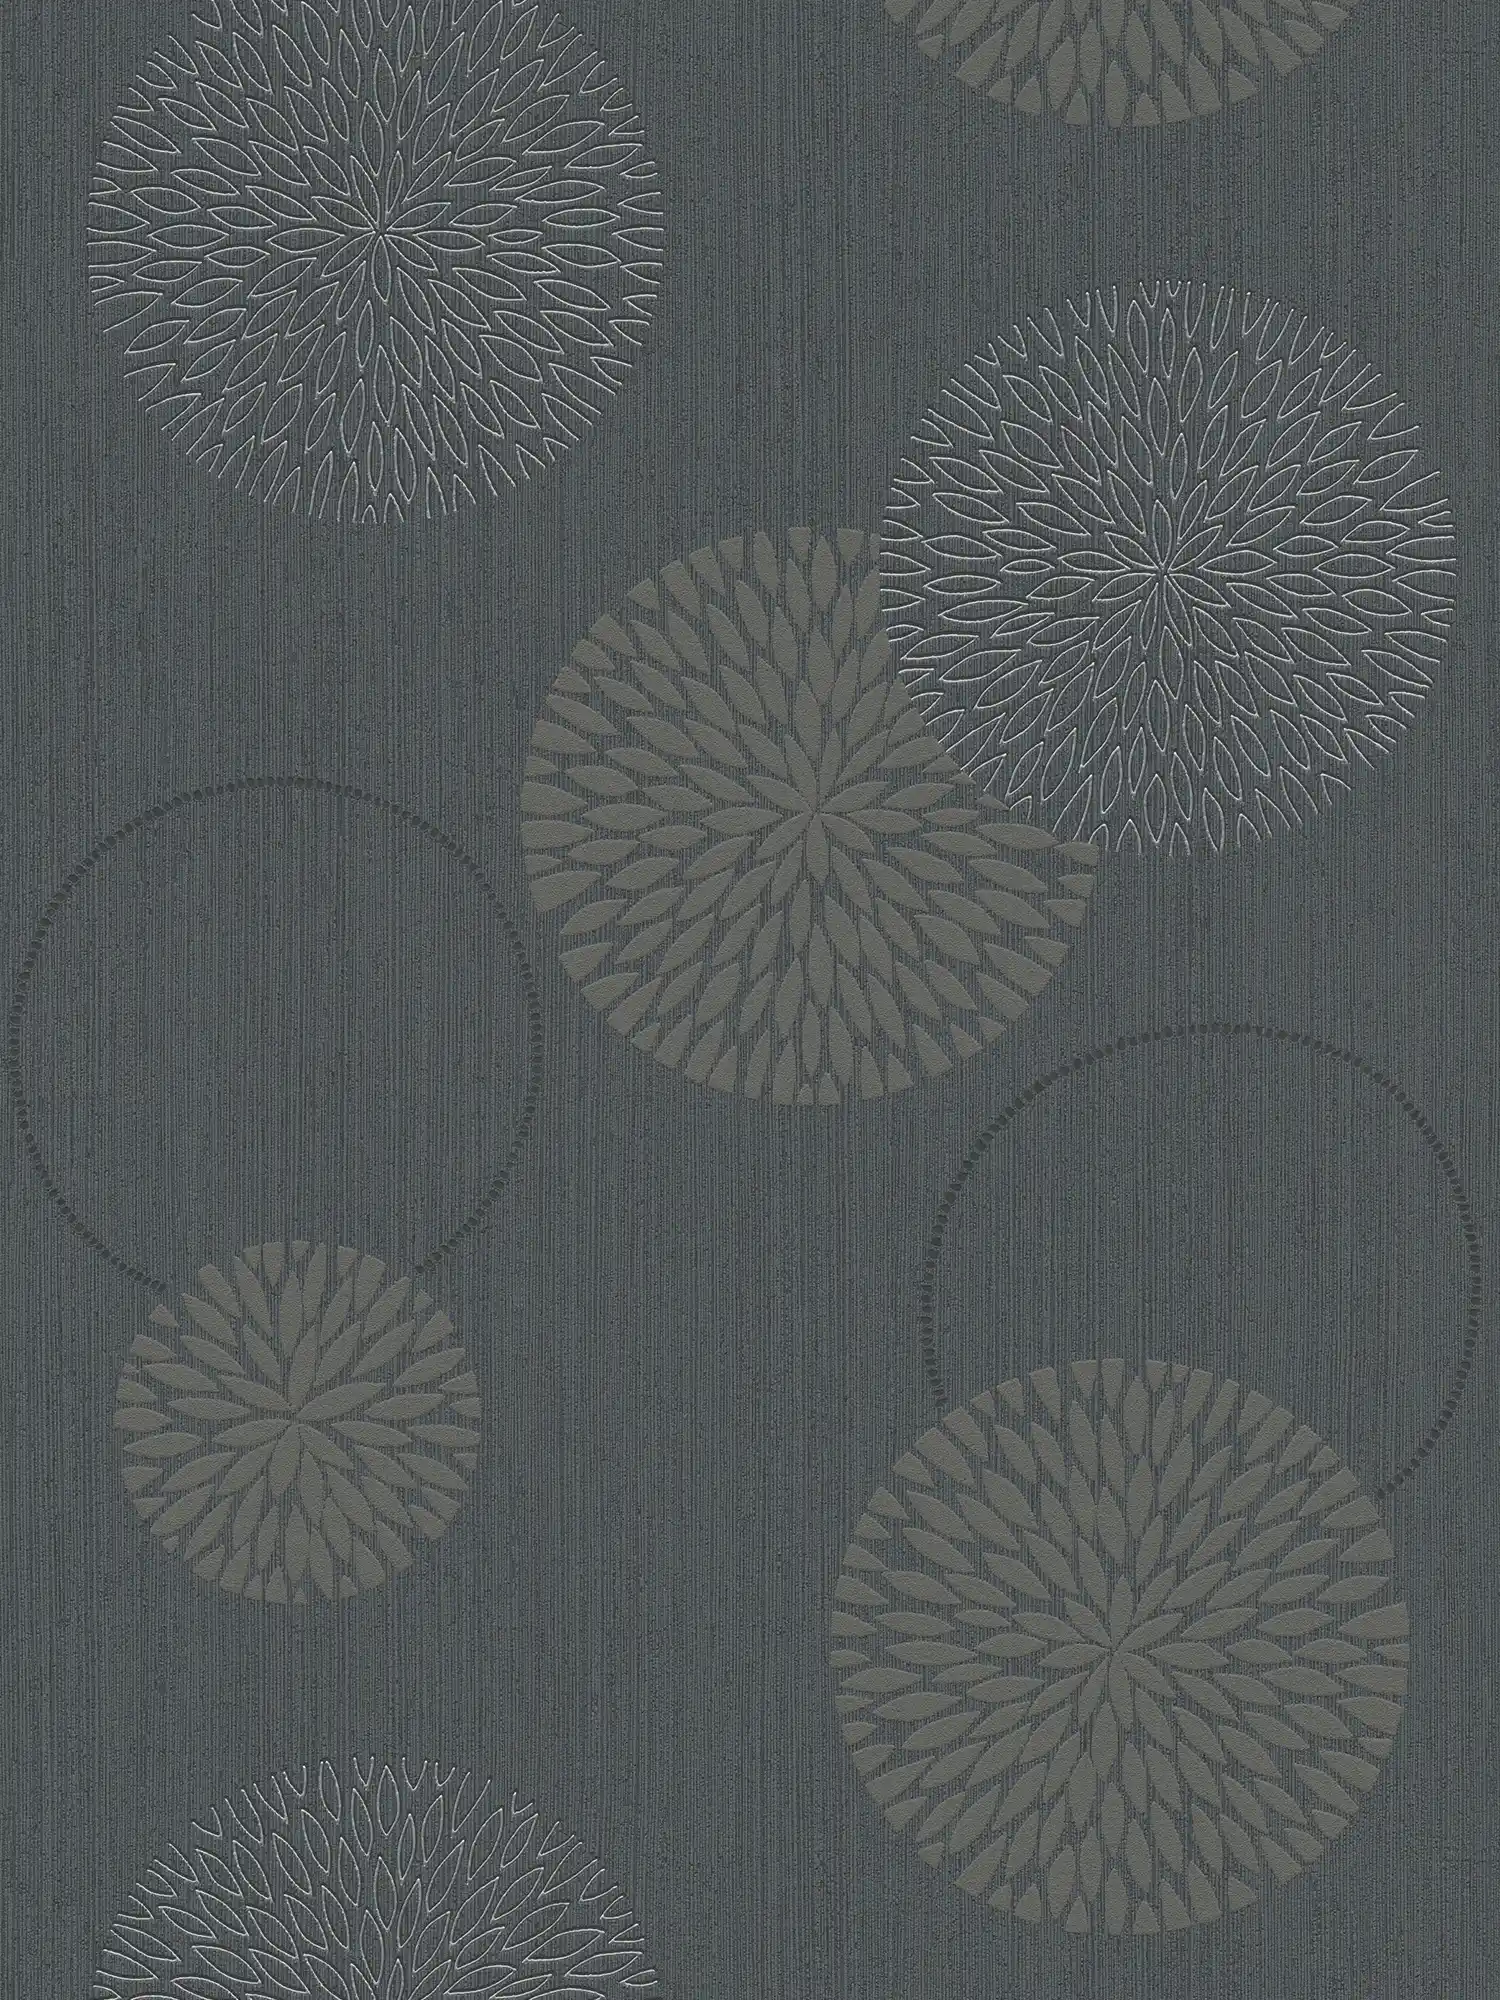 Non-woven wallpaper flowers in abstract design - grey, black
